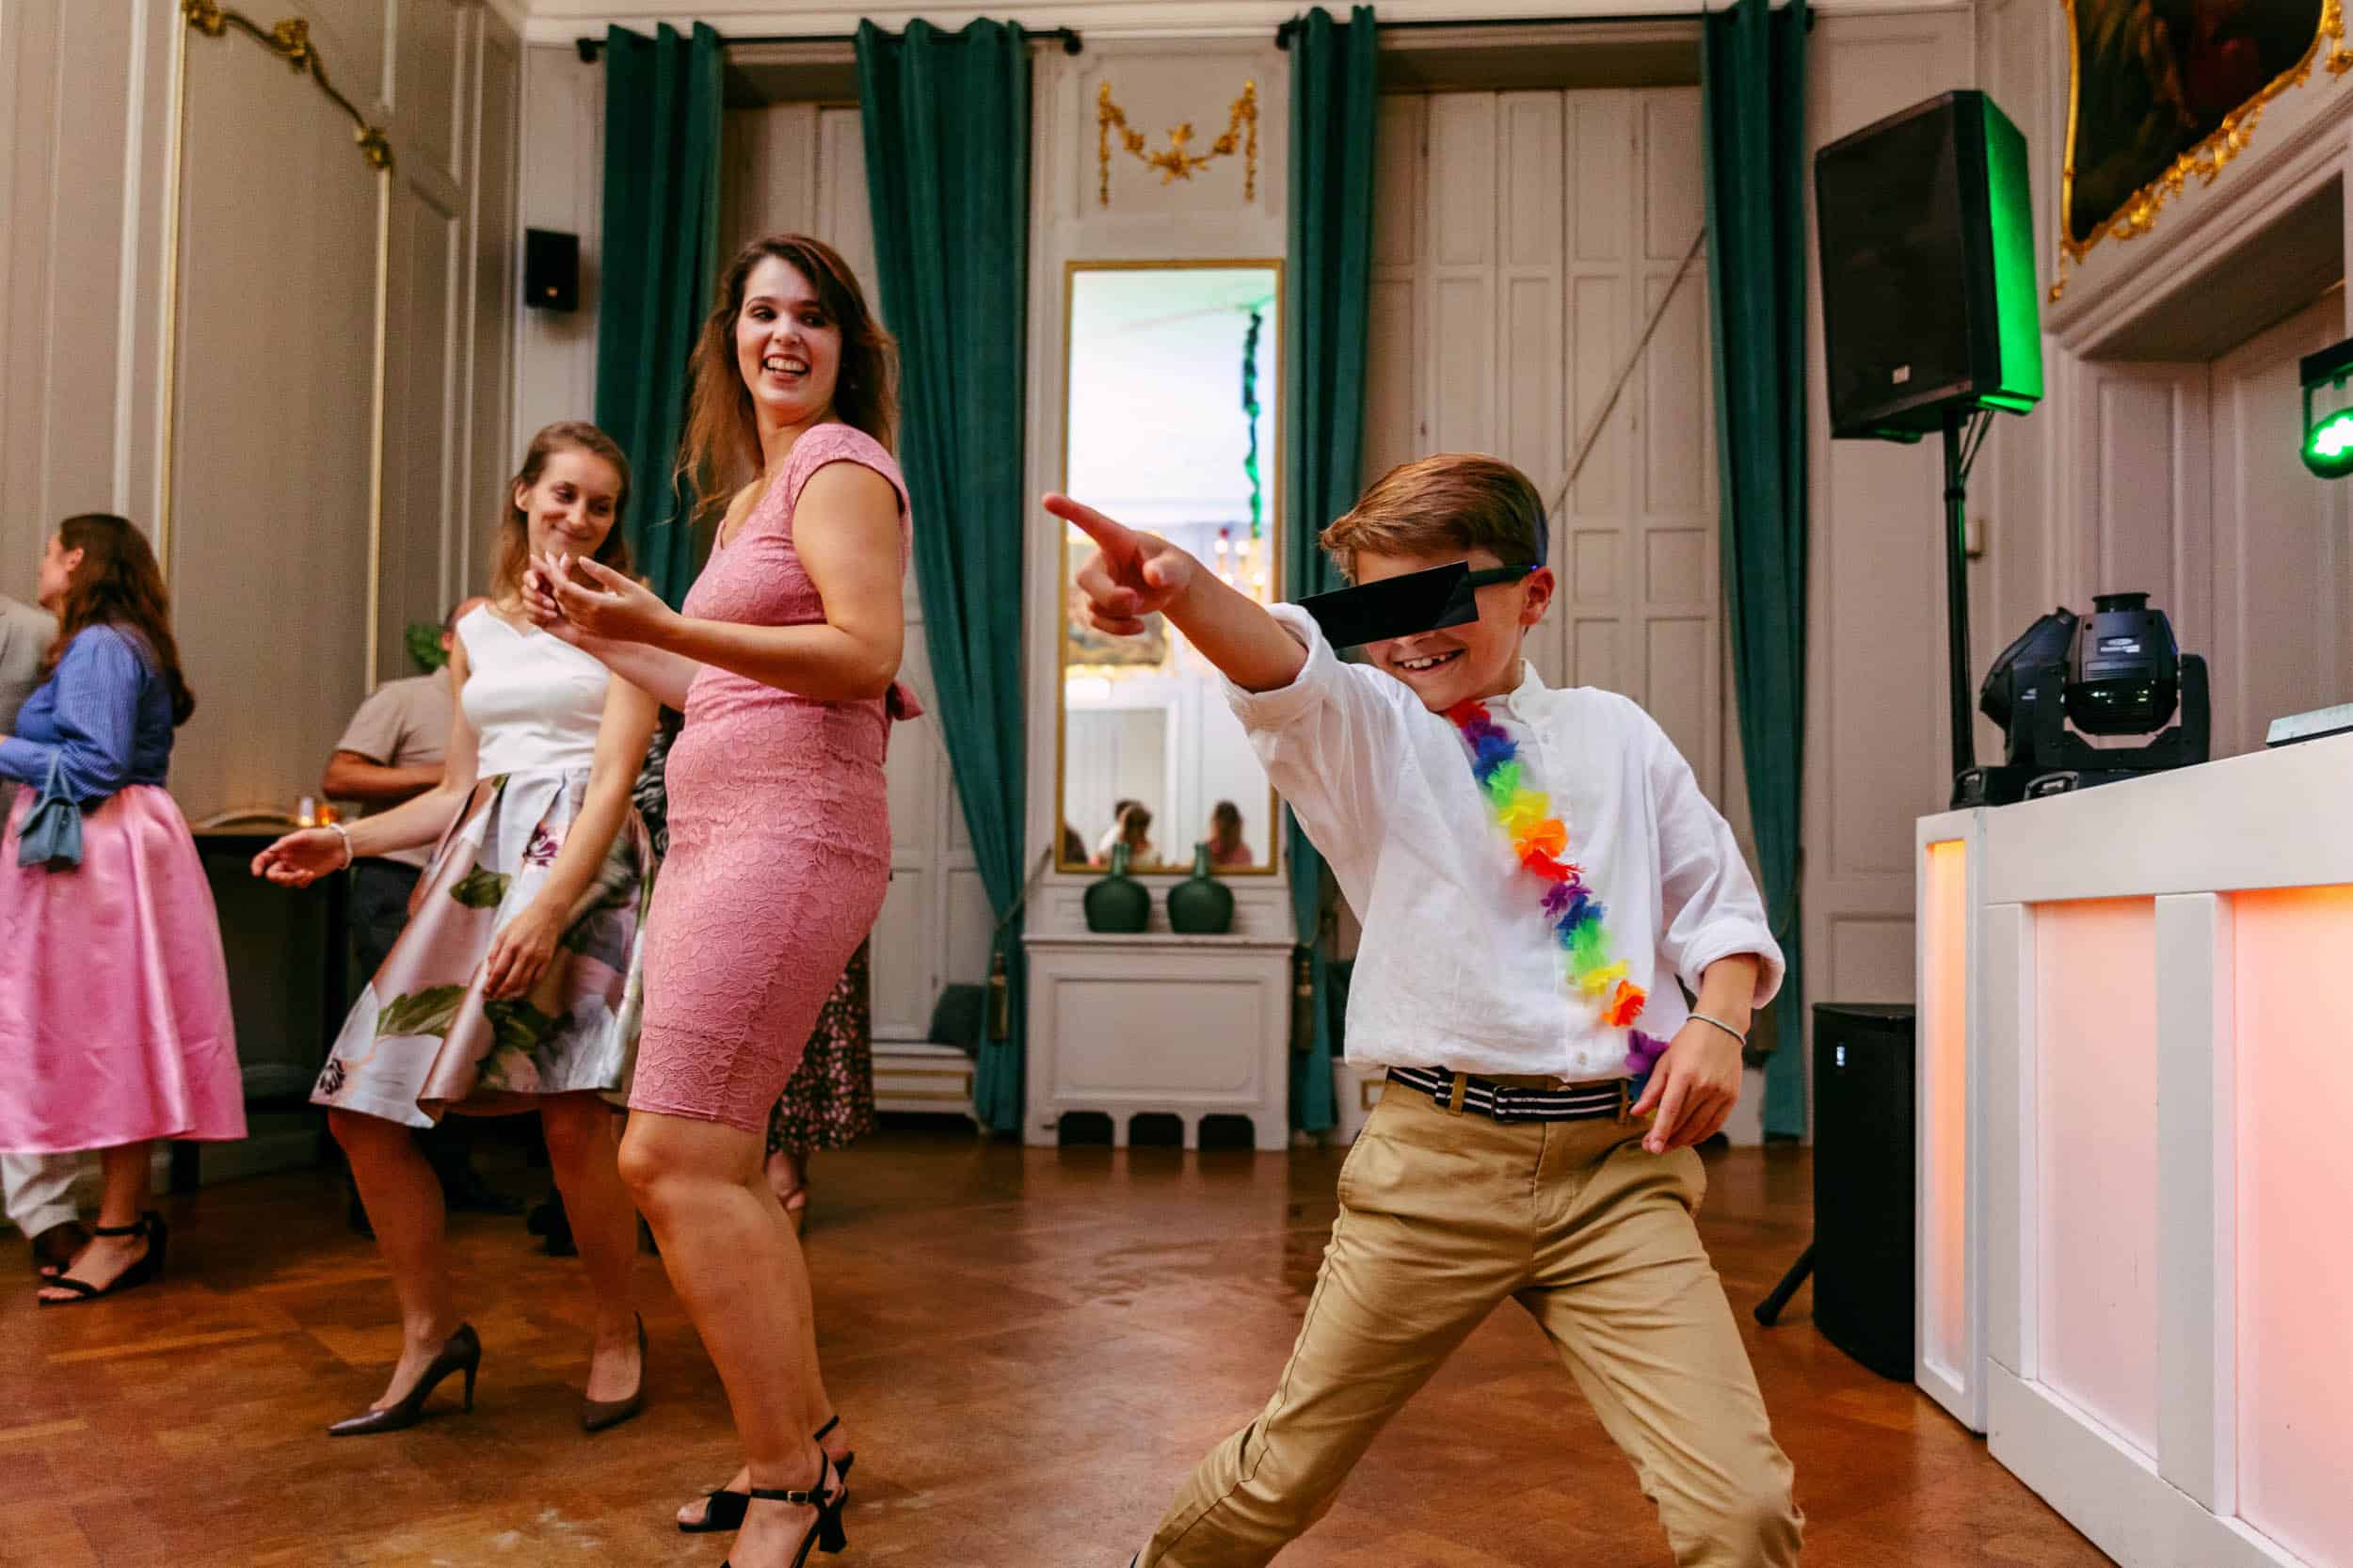 A group of people dancing at the perfect wedding party, captured by a wedding photographer.